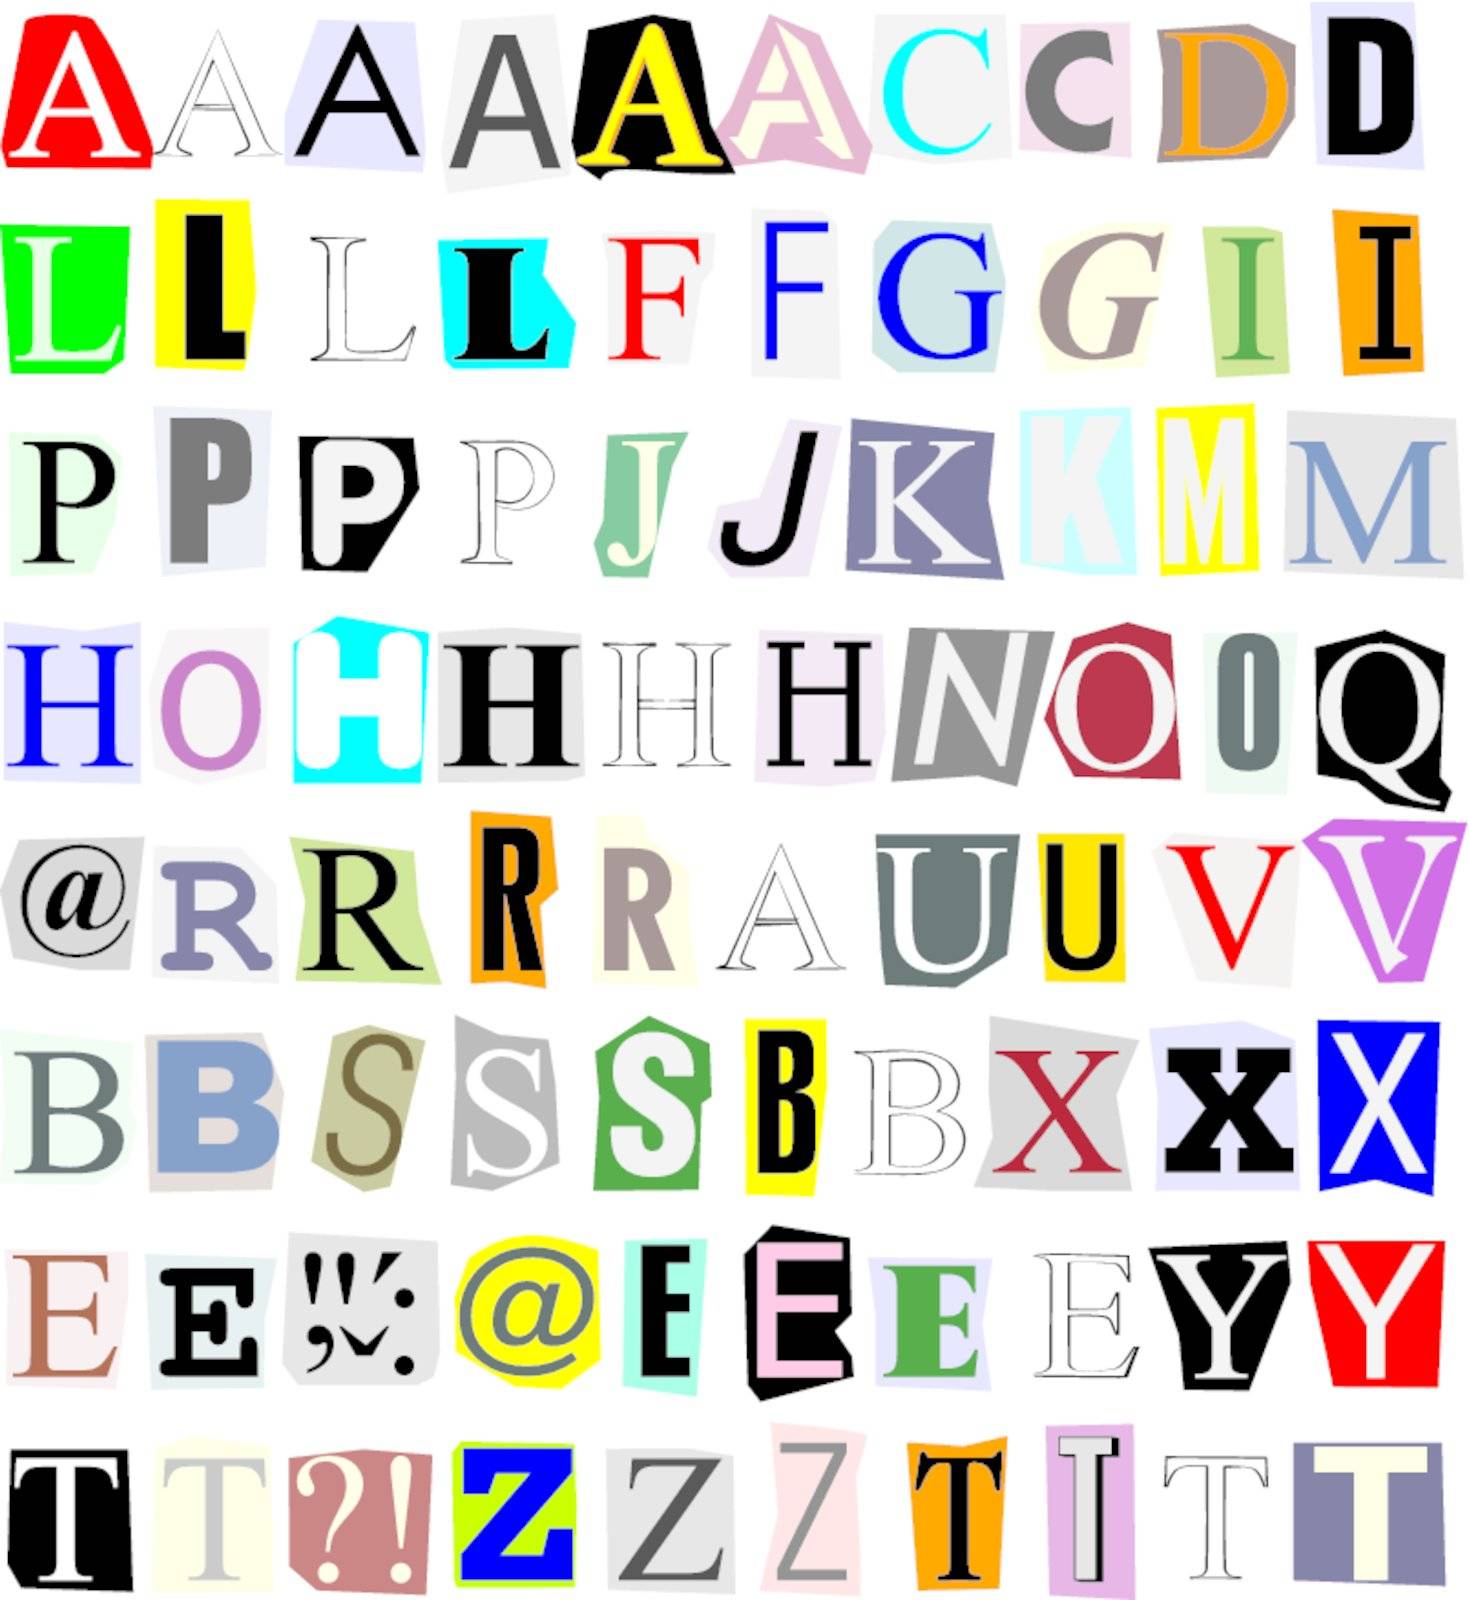 illustration of individual letters cut out of newspapers and magazines
